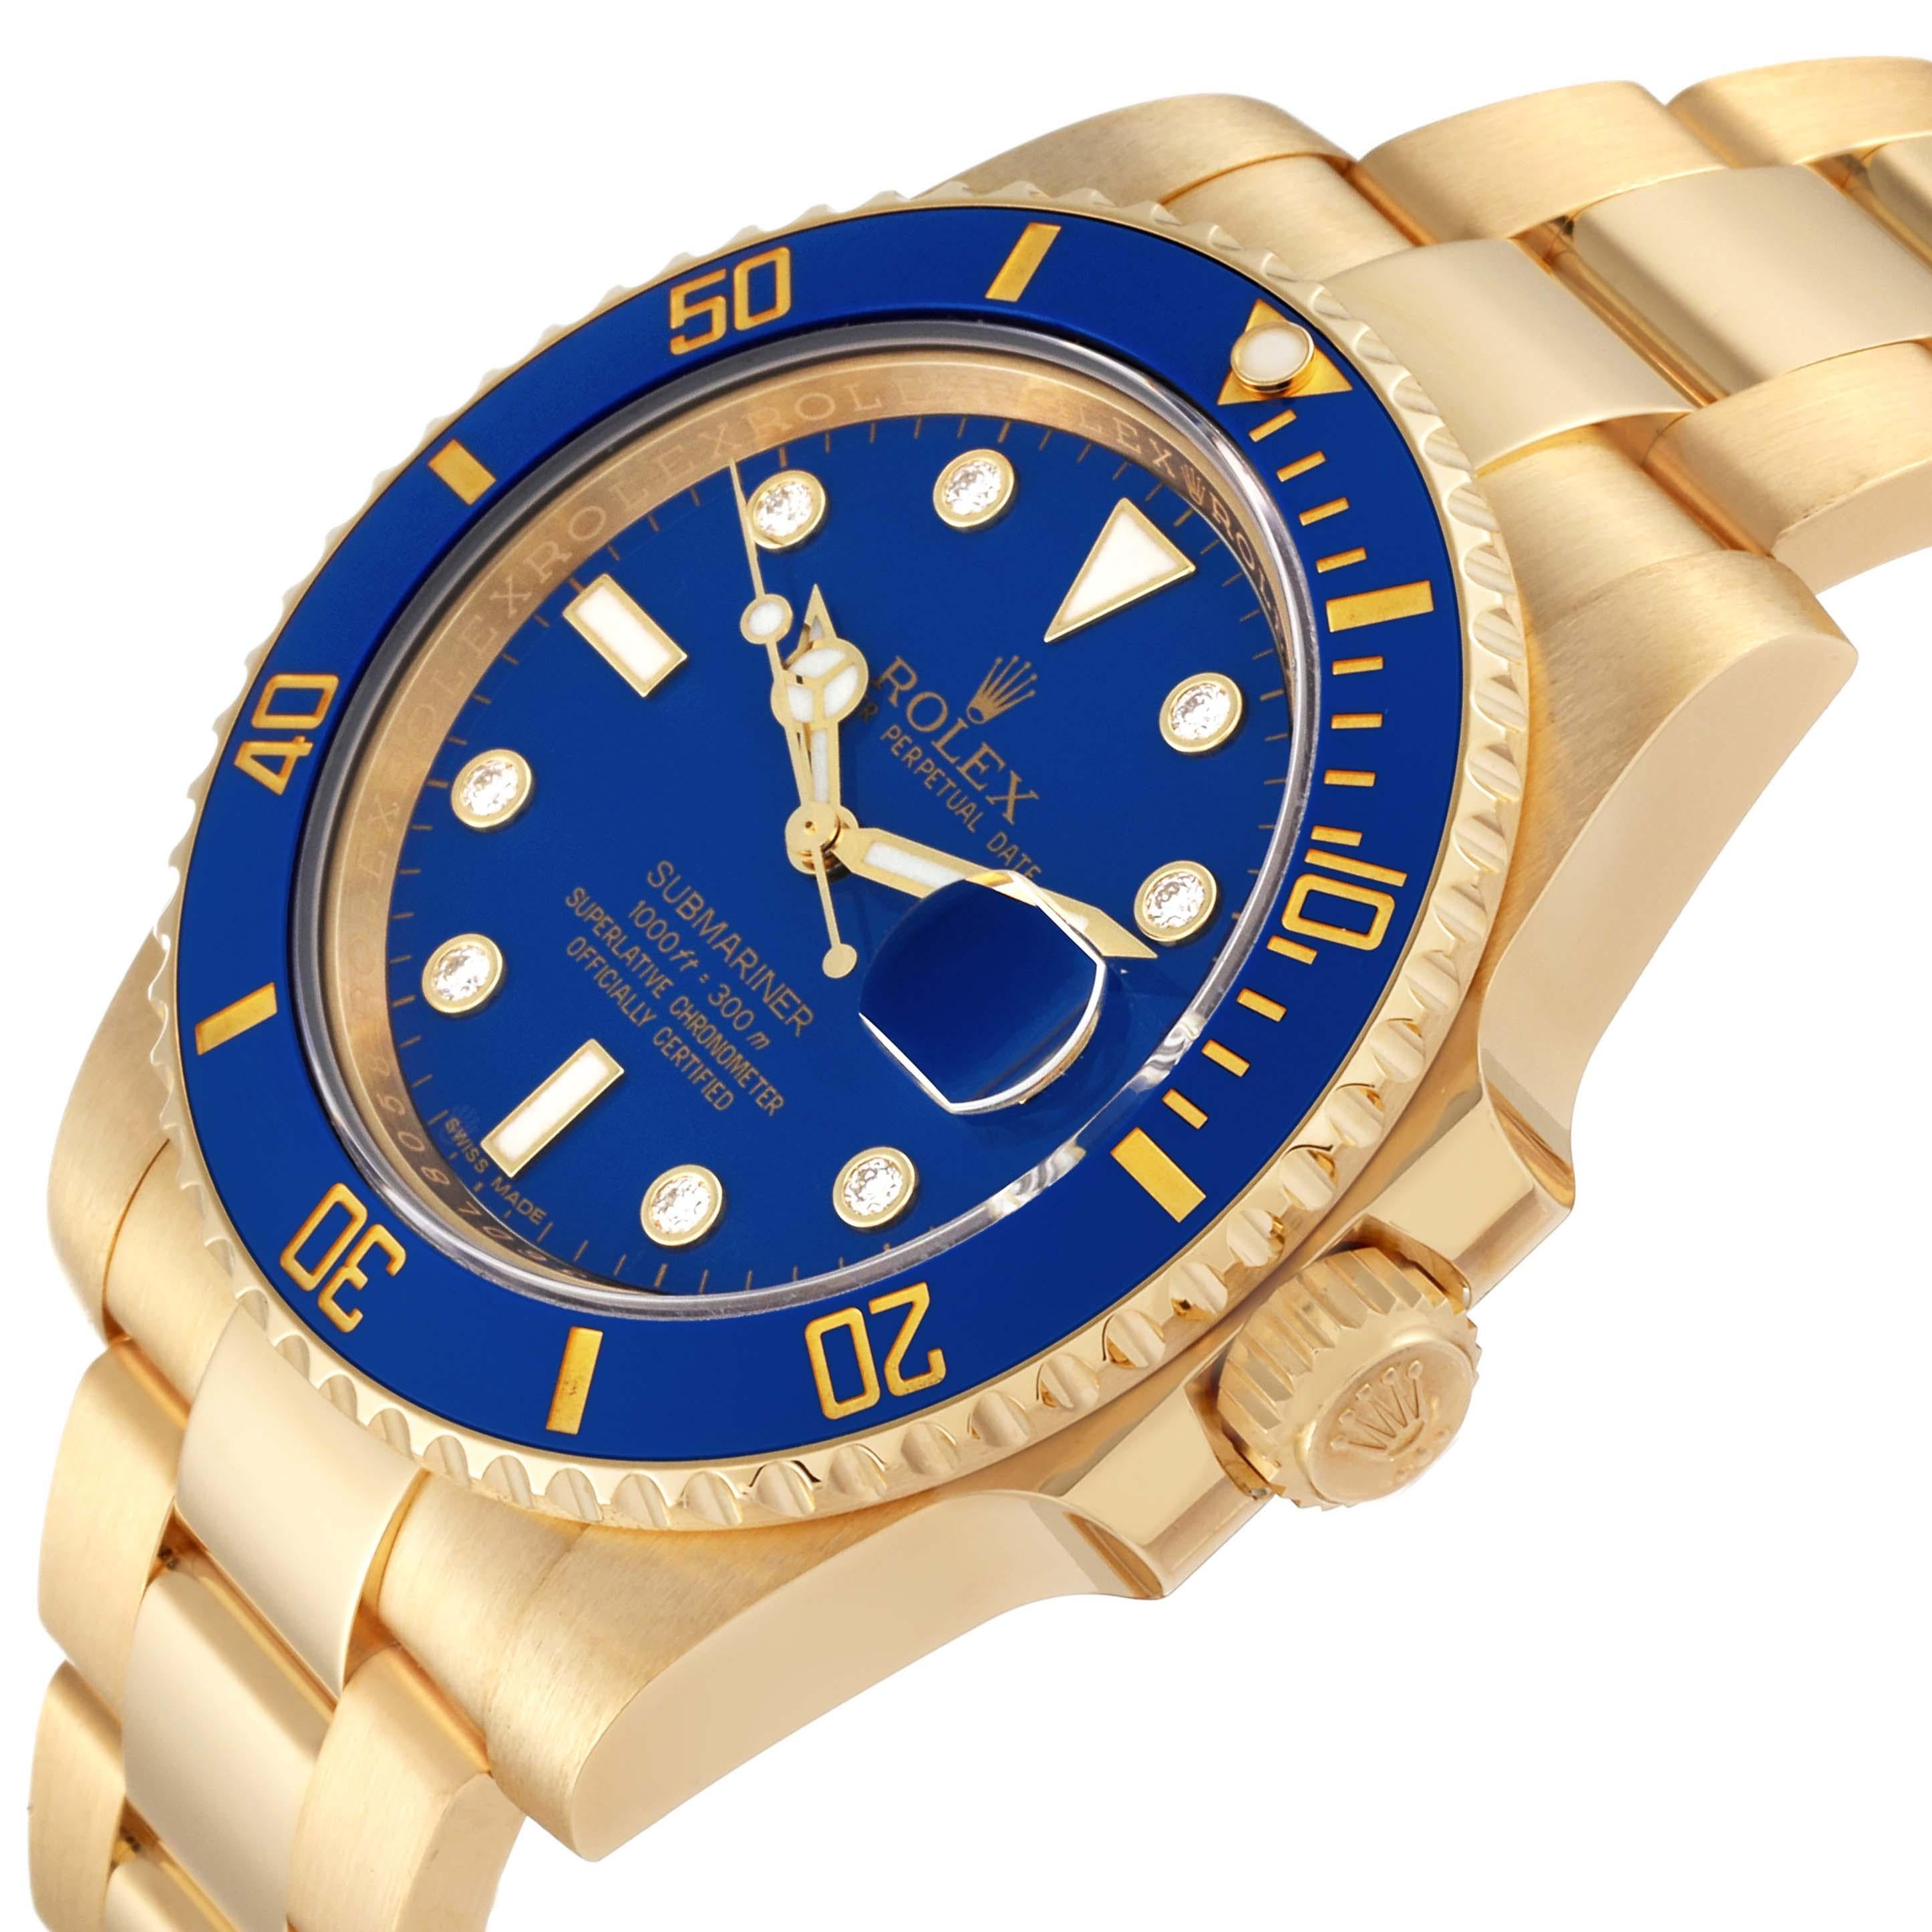 Rolex Submariner Yellow Gold Blue Diamond Dial Mens Watch 116618 Box Card For Sale 2